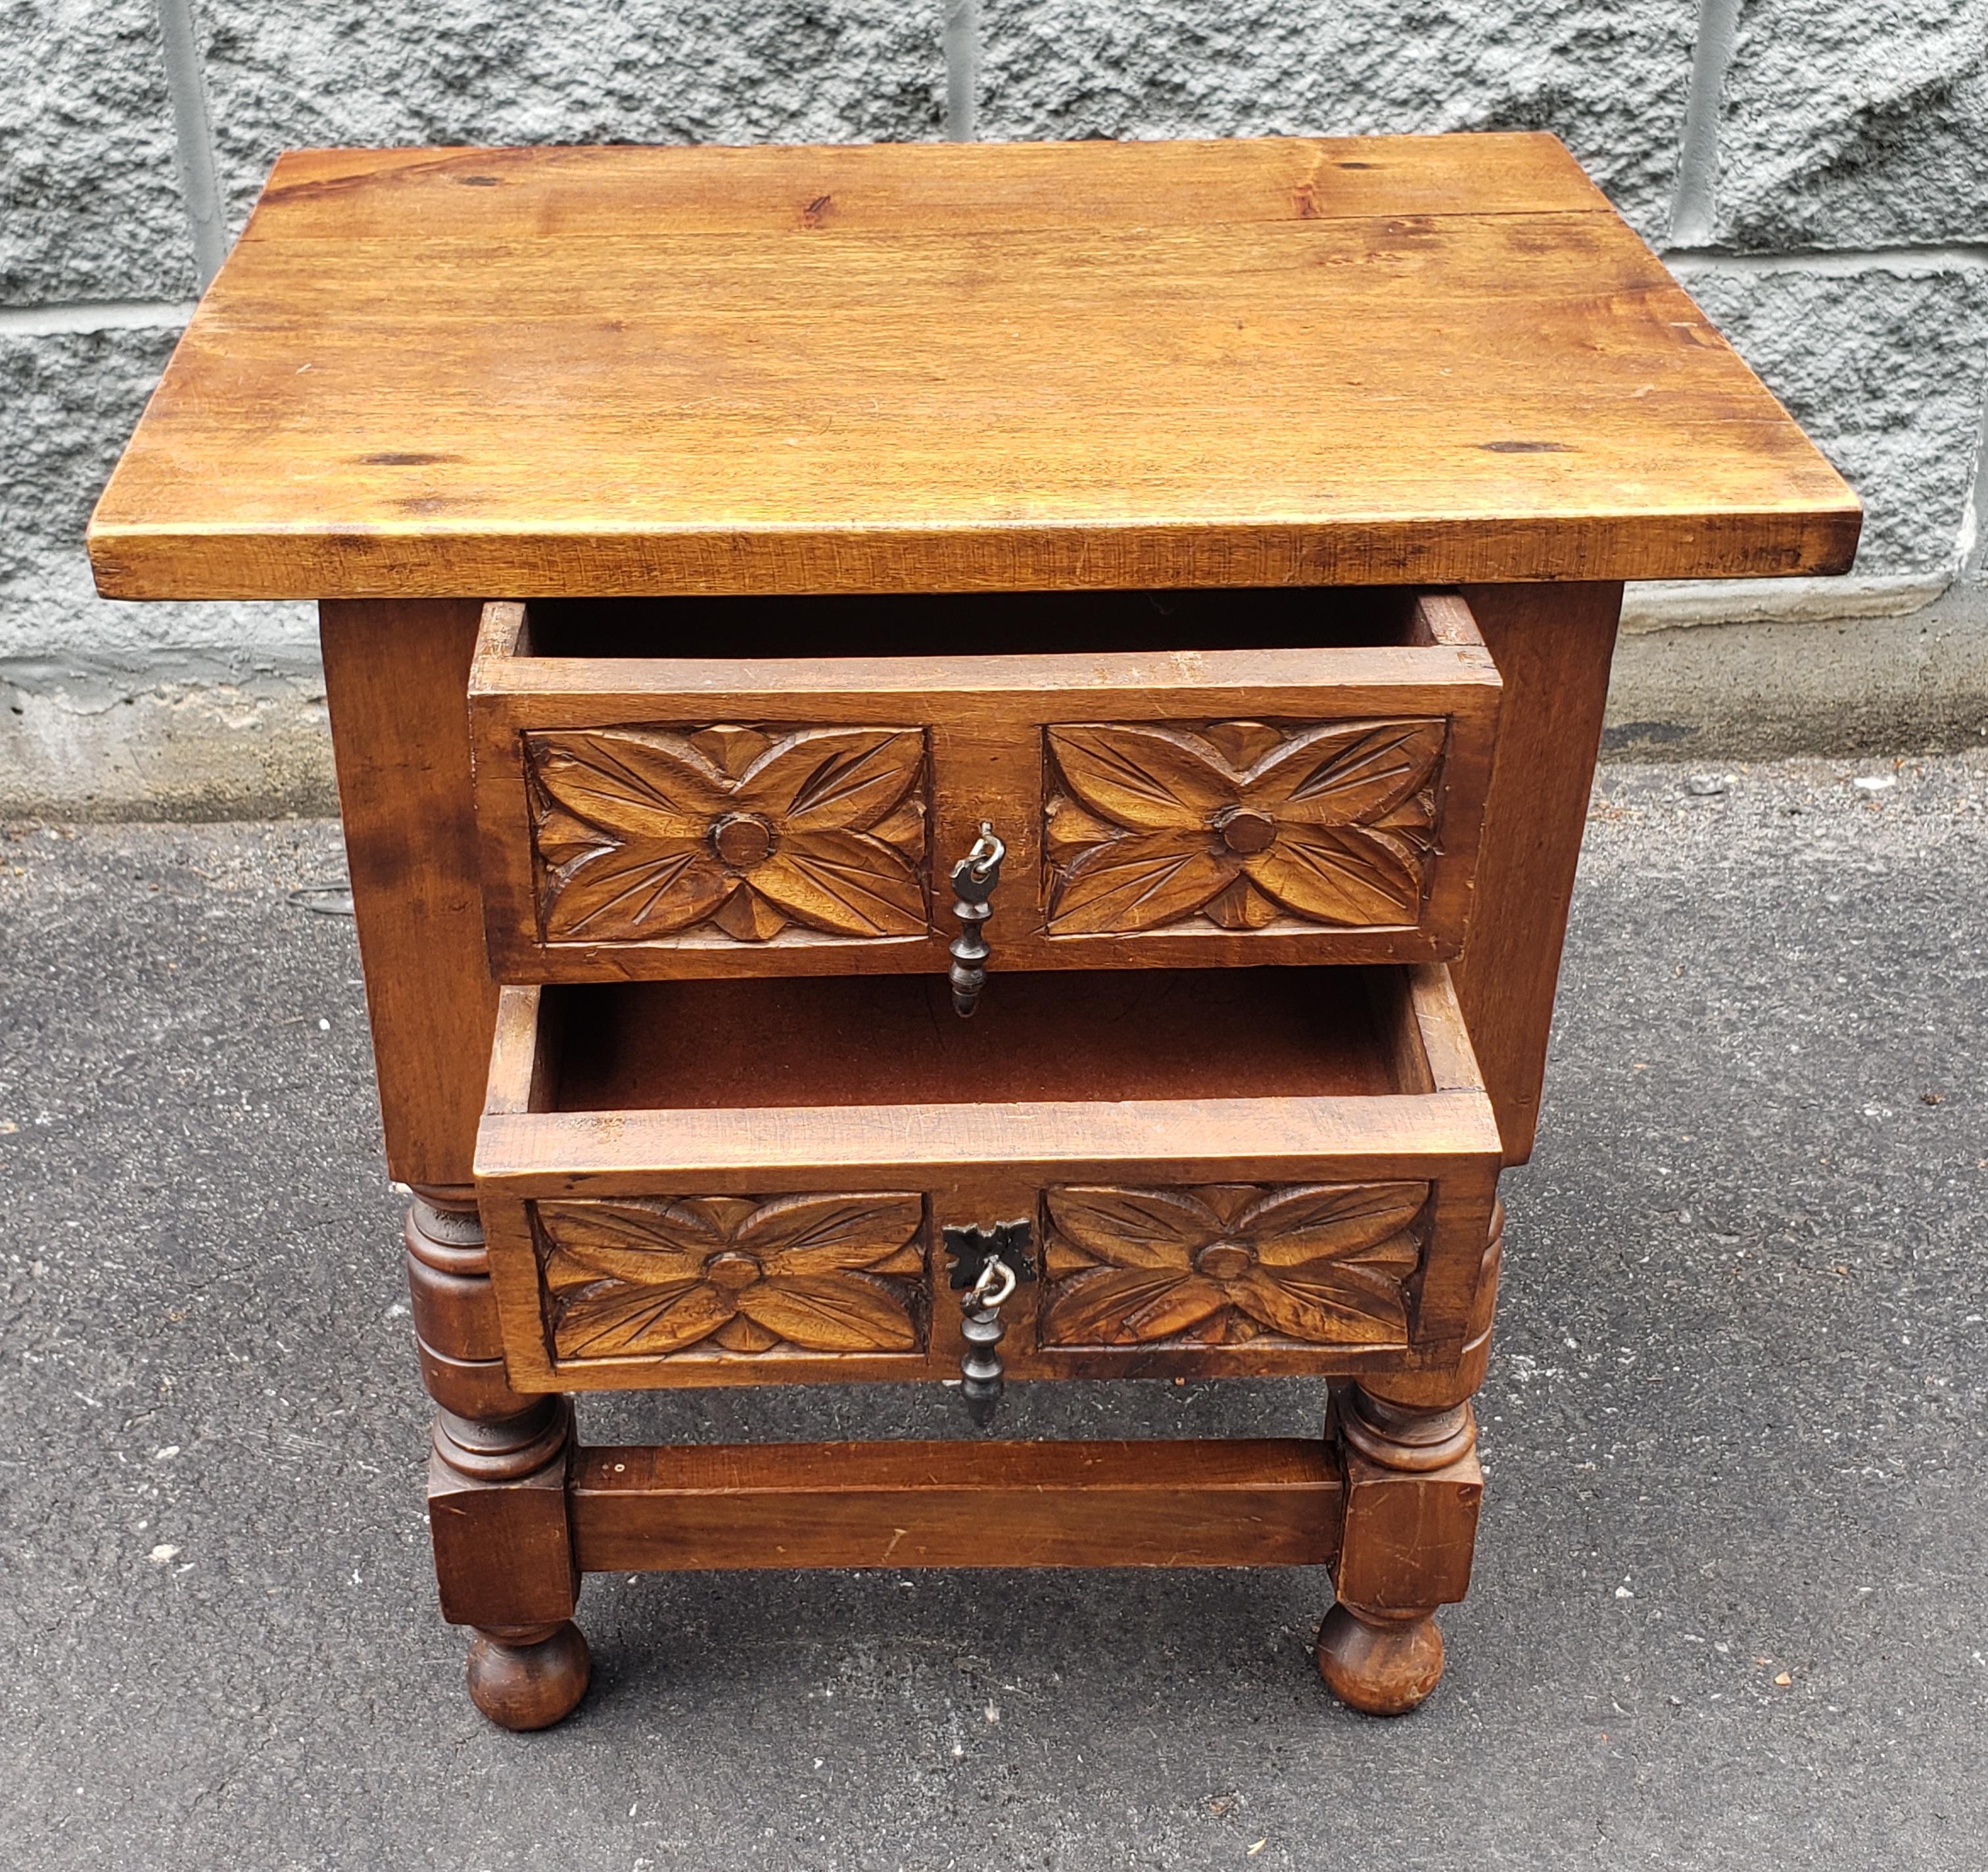 1920s Edwardian Carved Maple Two-Drawer Bedside Table that has been recently refinished.